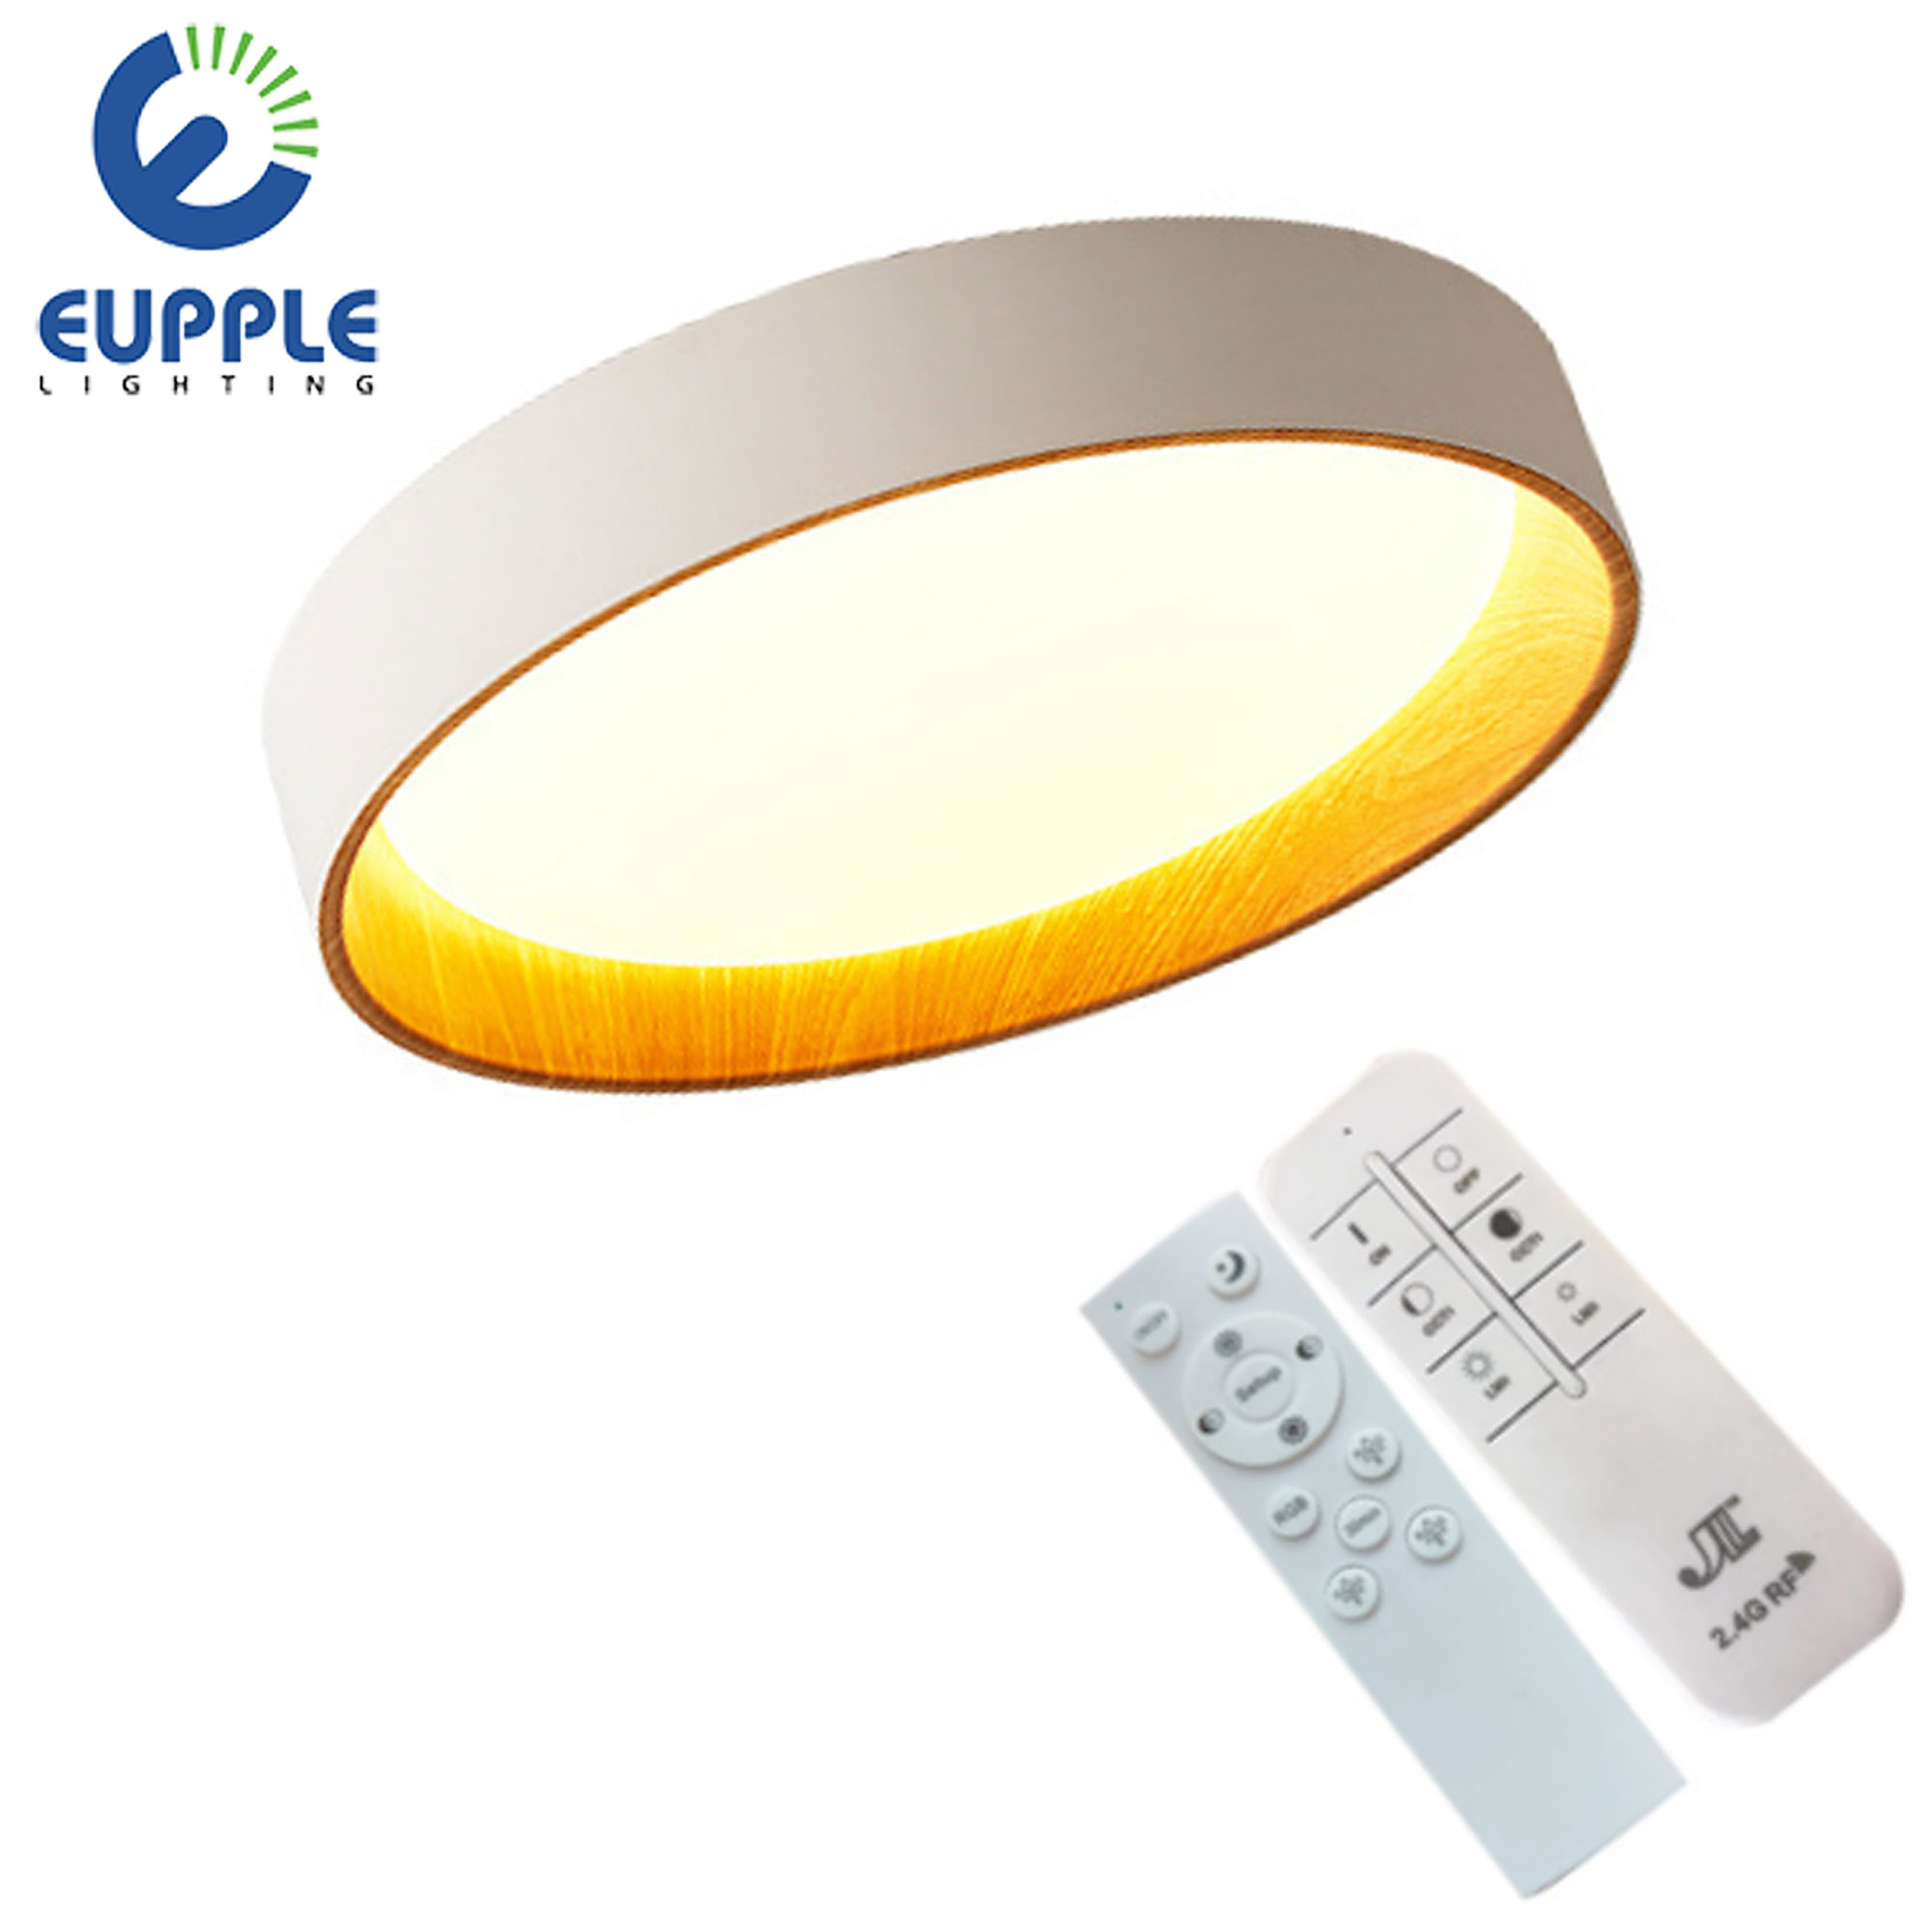 led multi color light with remote control,LED ceiling light with remote controller,remote controller led ceiling light